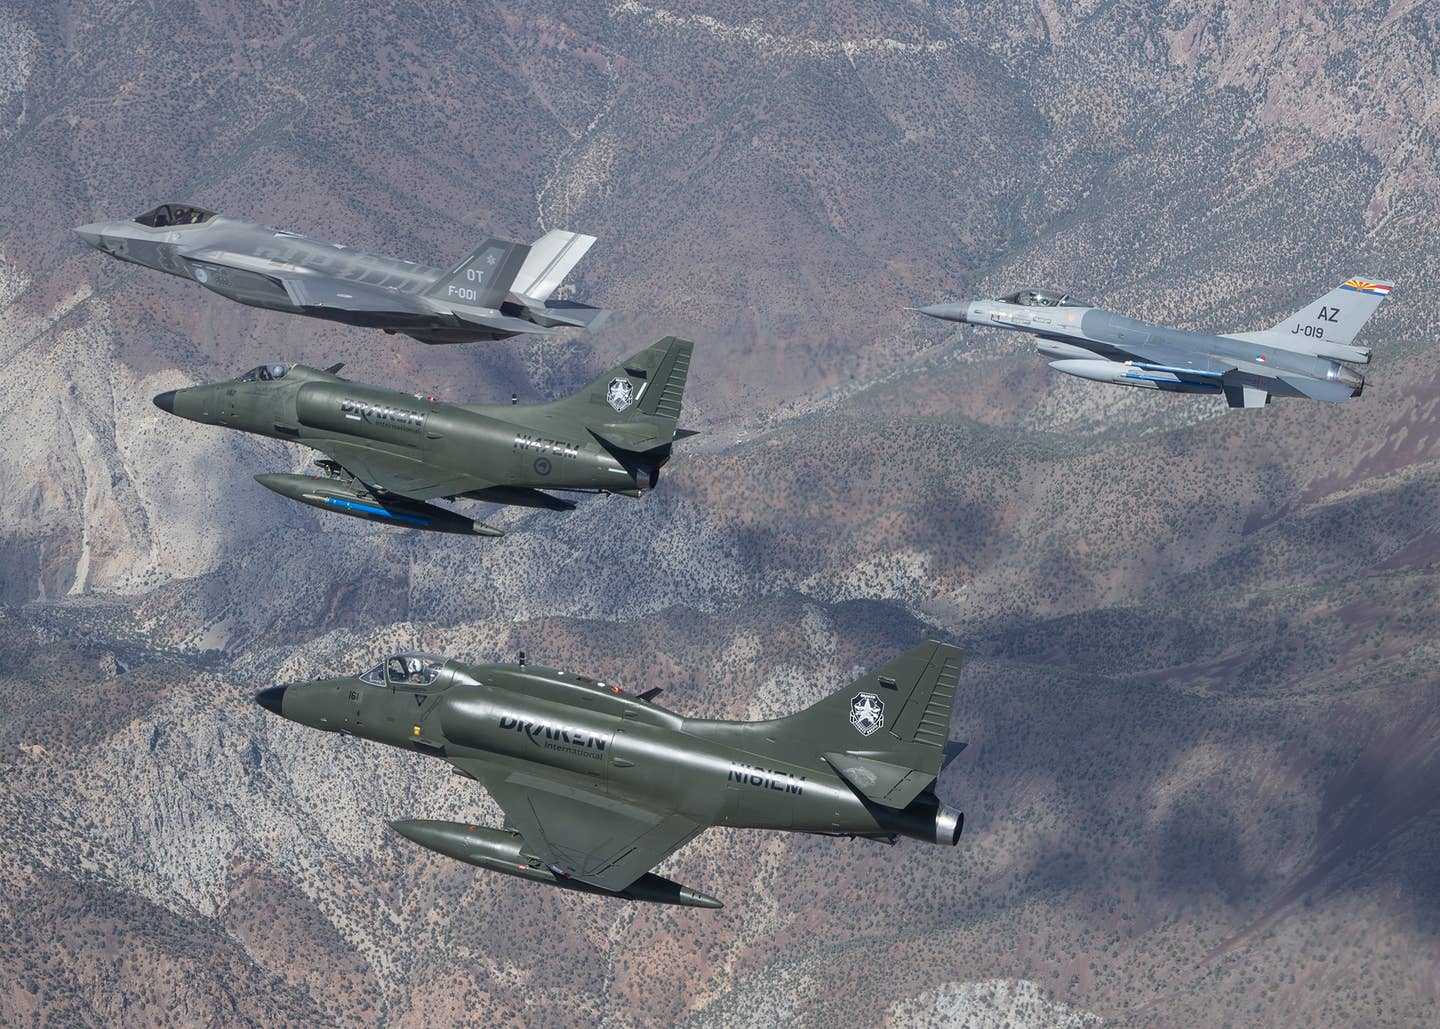 A Dutch F-35A, a Dutch F-16AM from the 162nd Fighter Wing, Arizona Air National Guard, and a pair of Draken International A-4 Skyhawks, during an operational test exercise at Edwards Air Force Base, California. <em>Photo courtesy of Frank Crebas</em><br><a href="https://www.edwards.af.mil/News/Article/828636/a-4-skyhawks-support-f-35-operational-testing/undefined"></a>